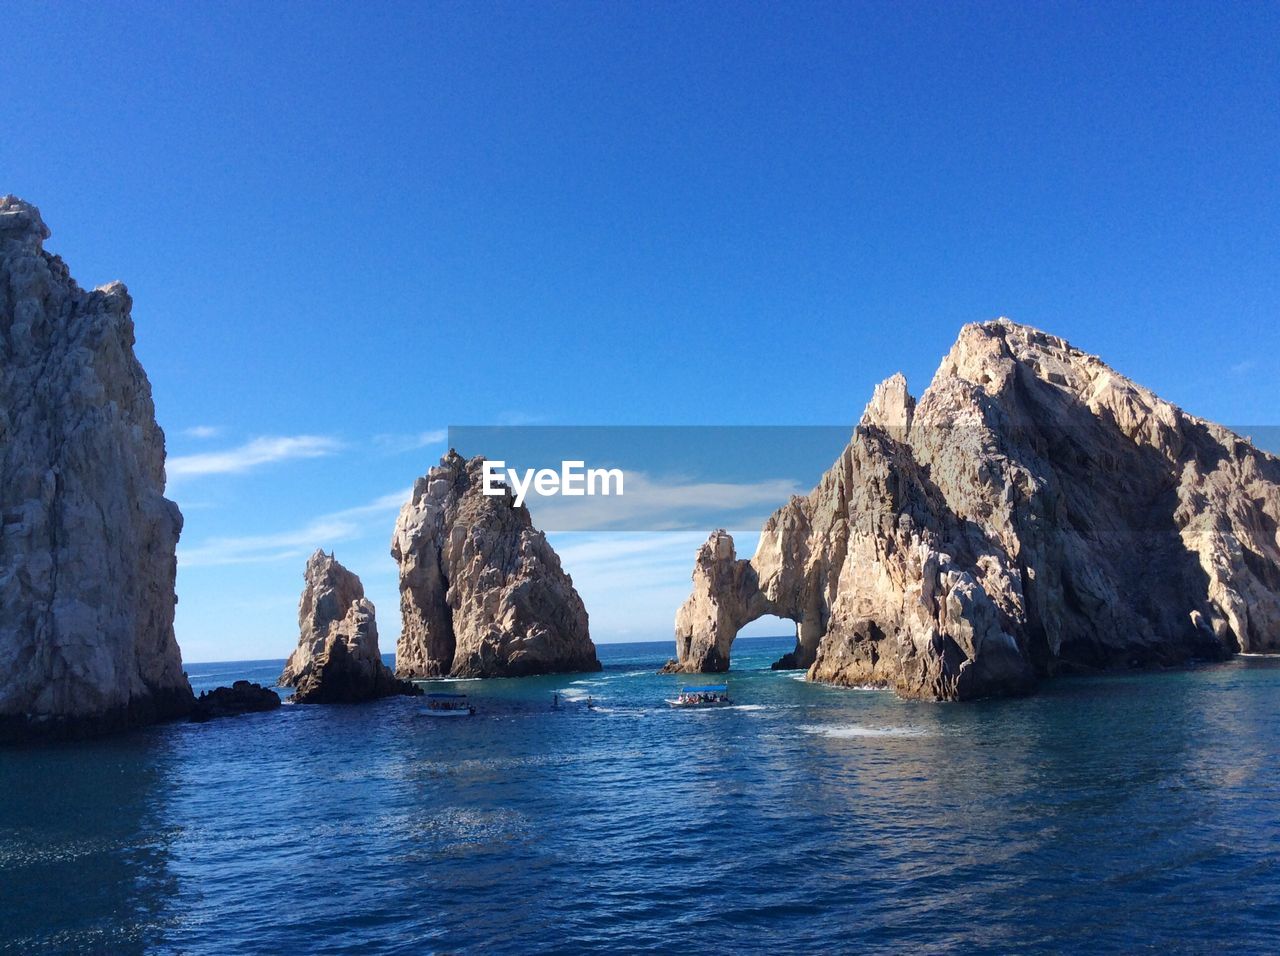 SCENIC VIEW OF SEA AND ROCKS AGAINST BLUE SKY